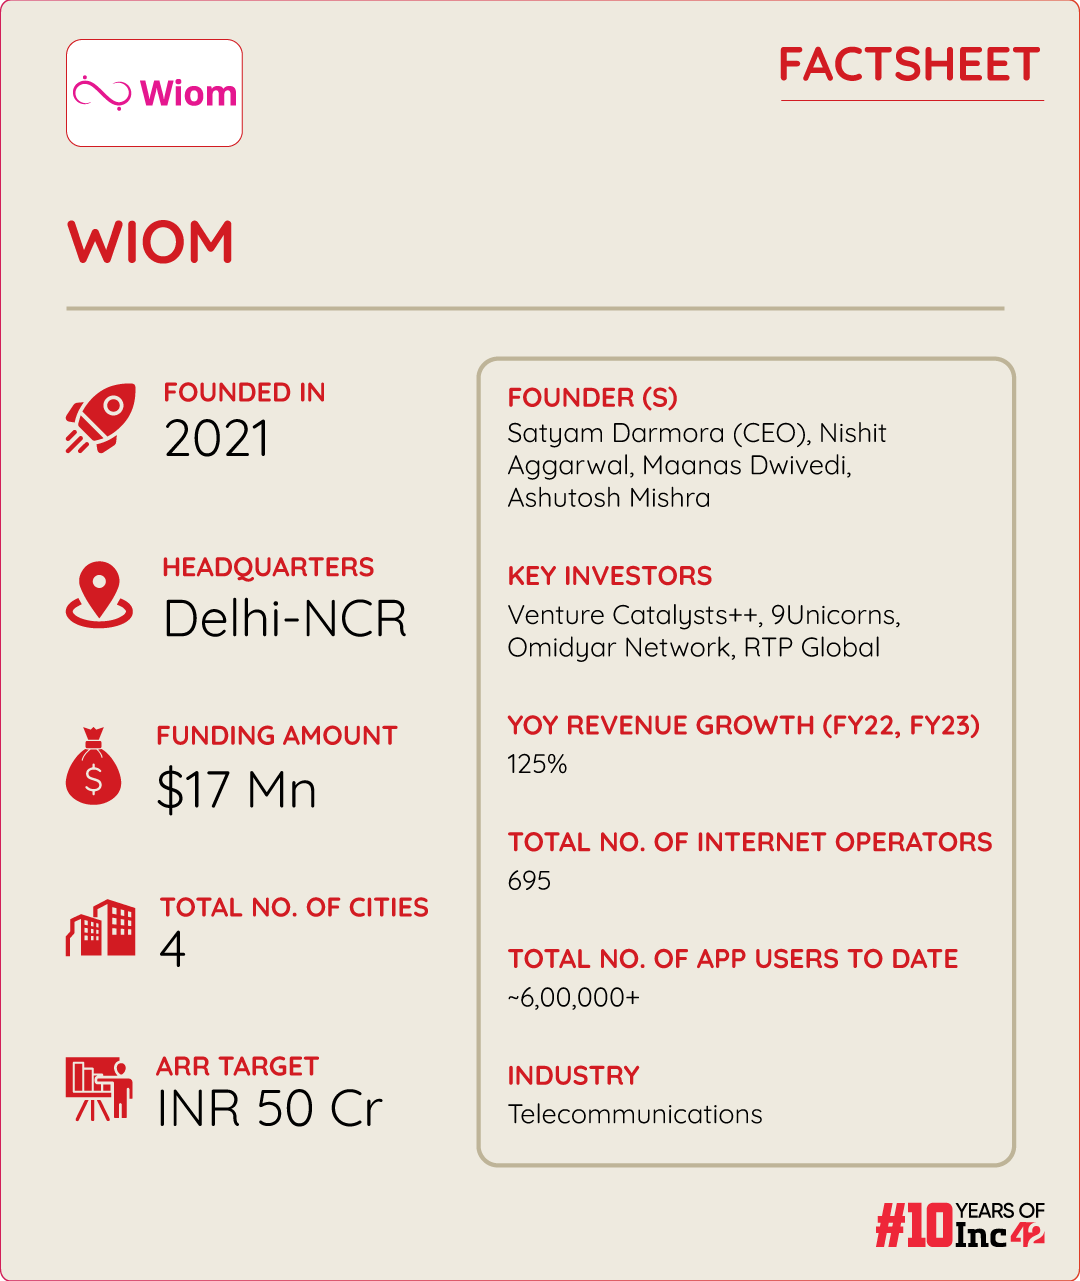 How WIOM Has Helped India In Getting Its Digital Makeover By Democratising Internet 